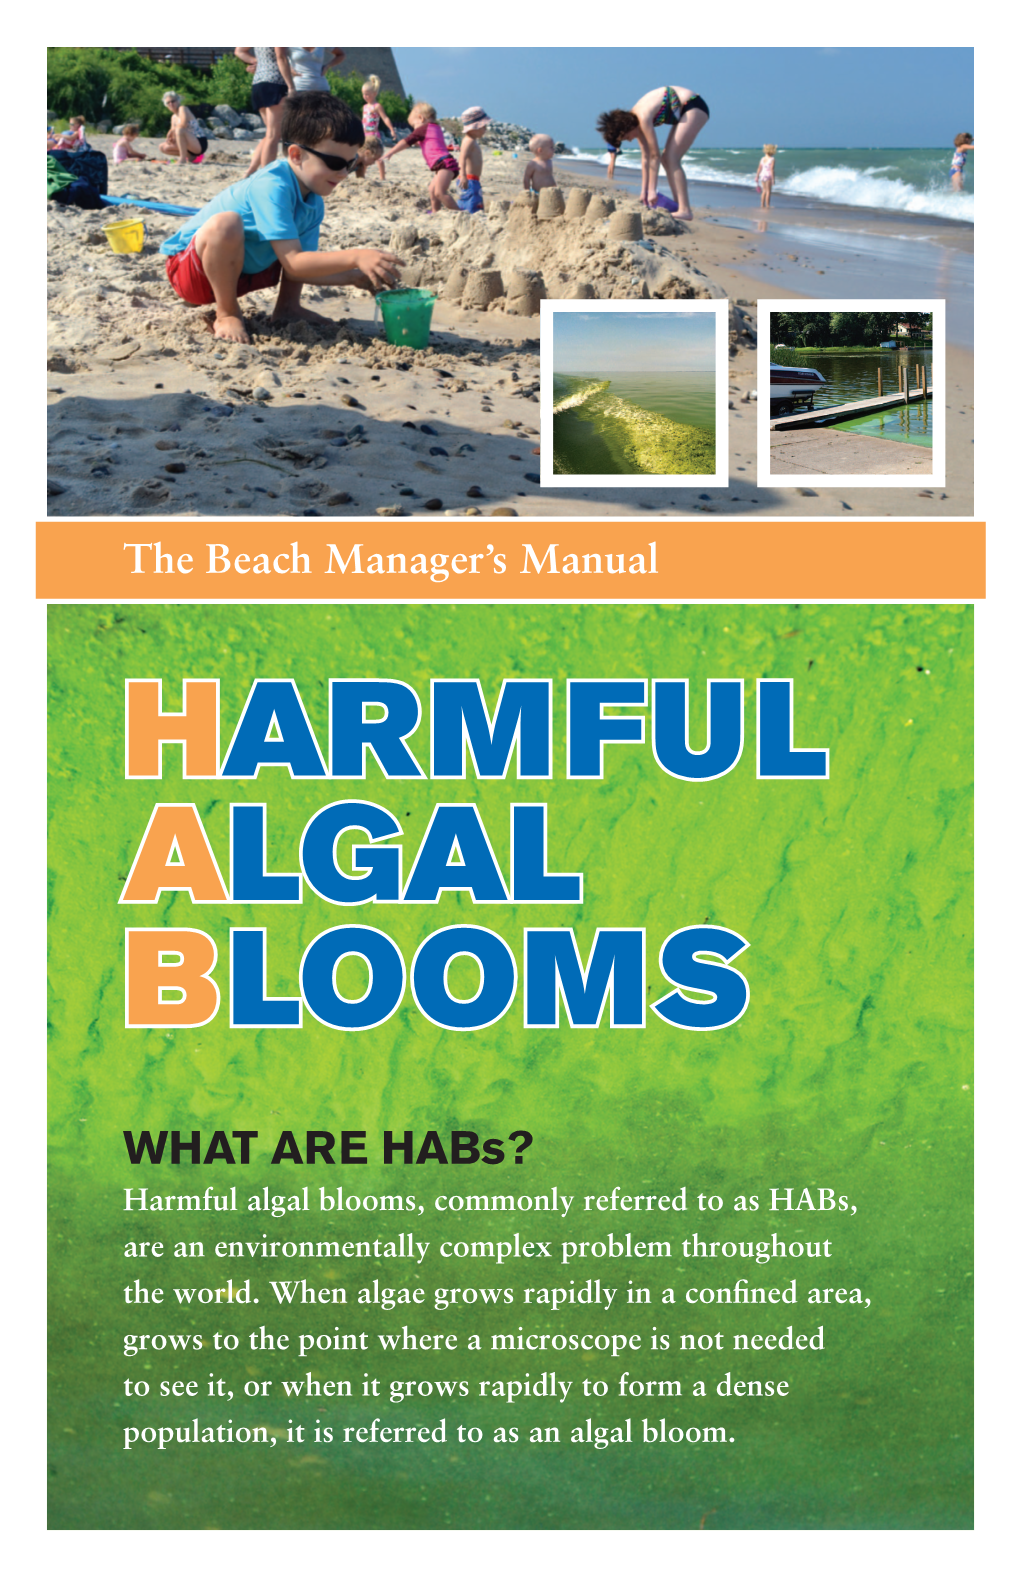 The Beach Manager's Manual: Harmful Algal Blooms